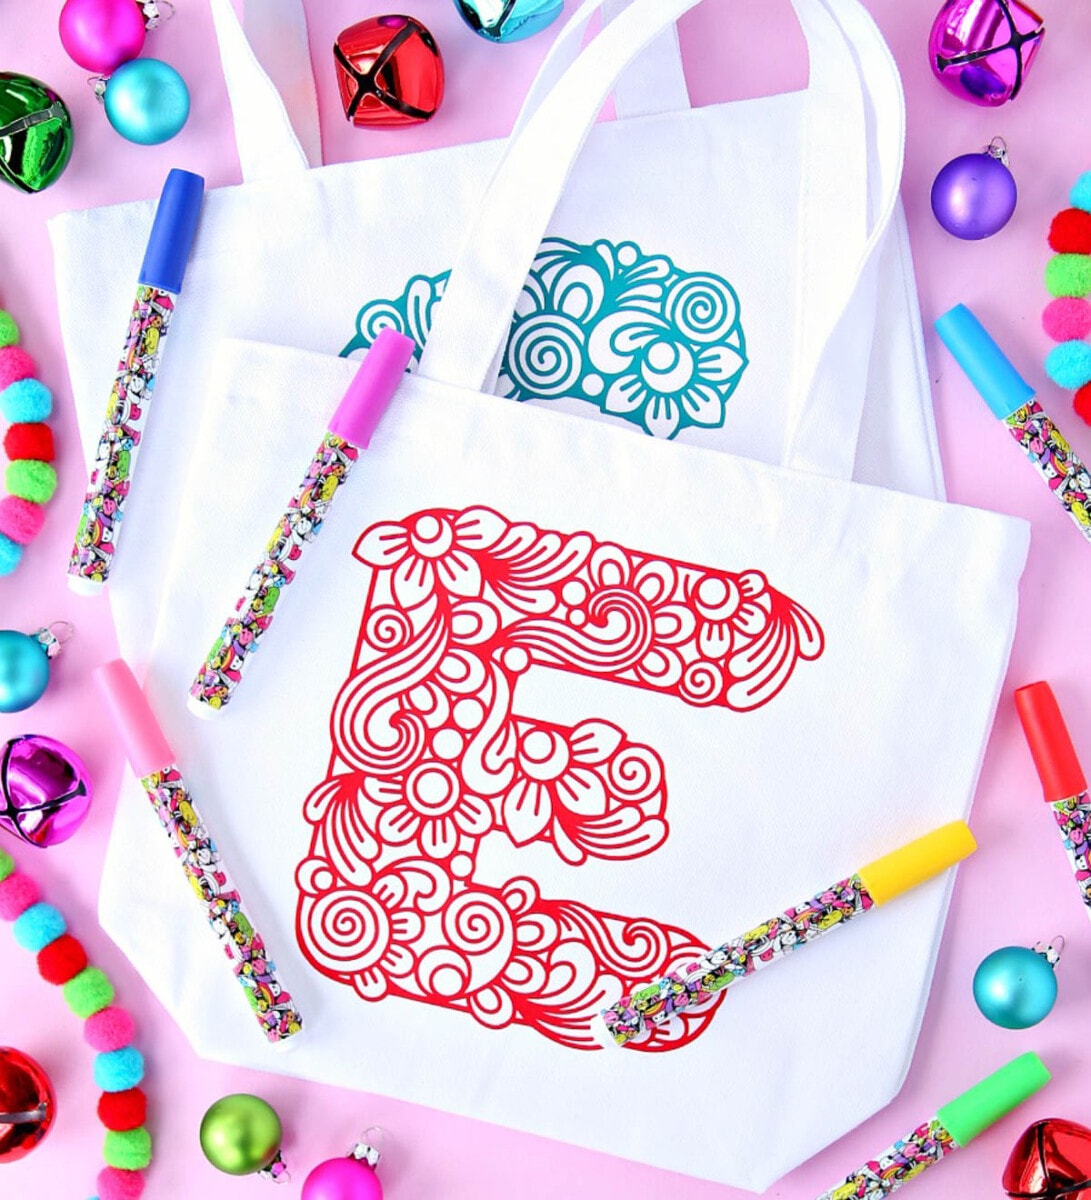 Custom tote bag that becomes part of the Cricut gift idea when you add fabric makers to the gift bag